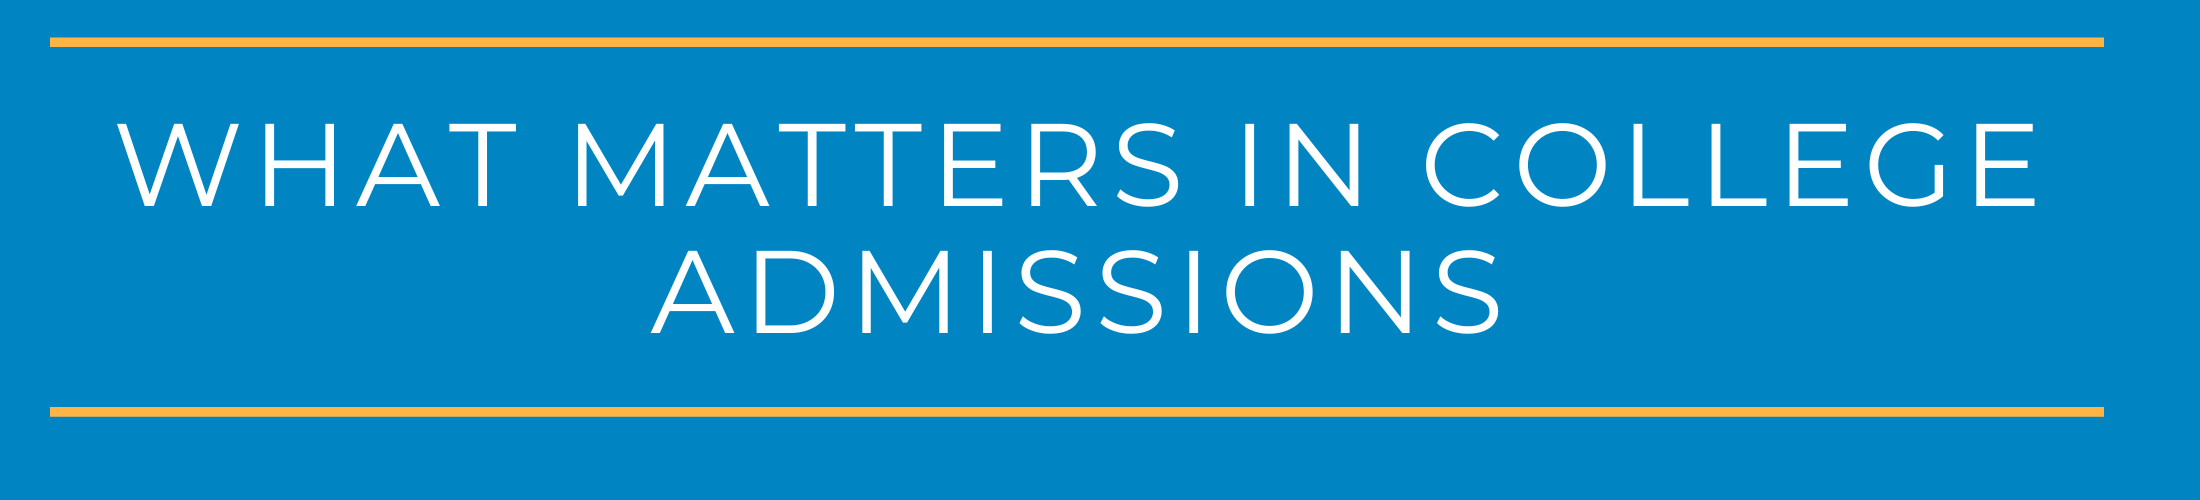 What Matters in College Admissions